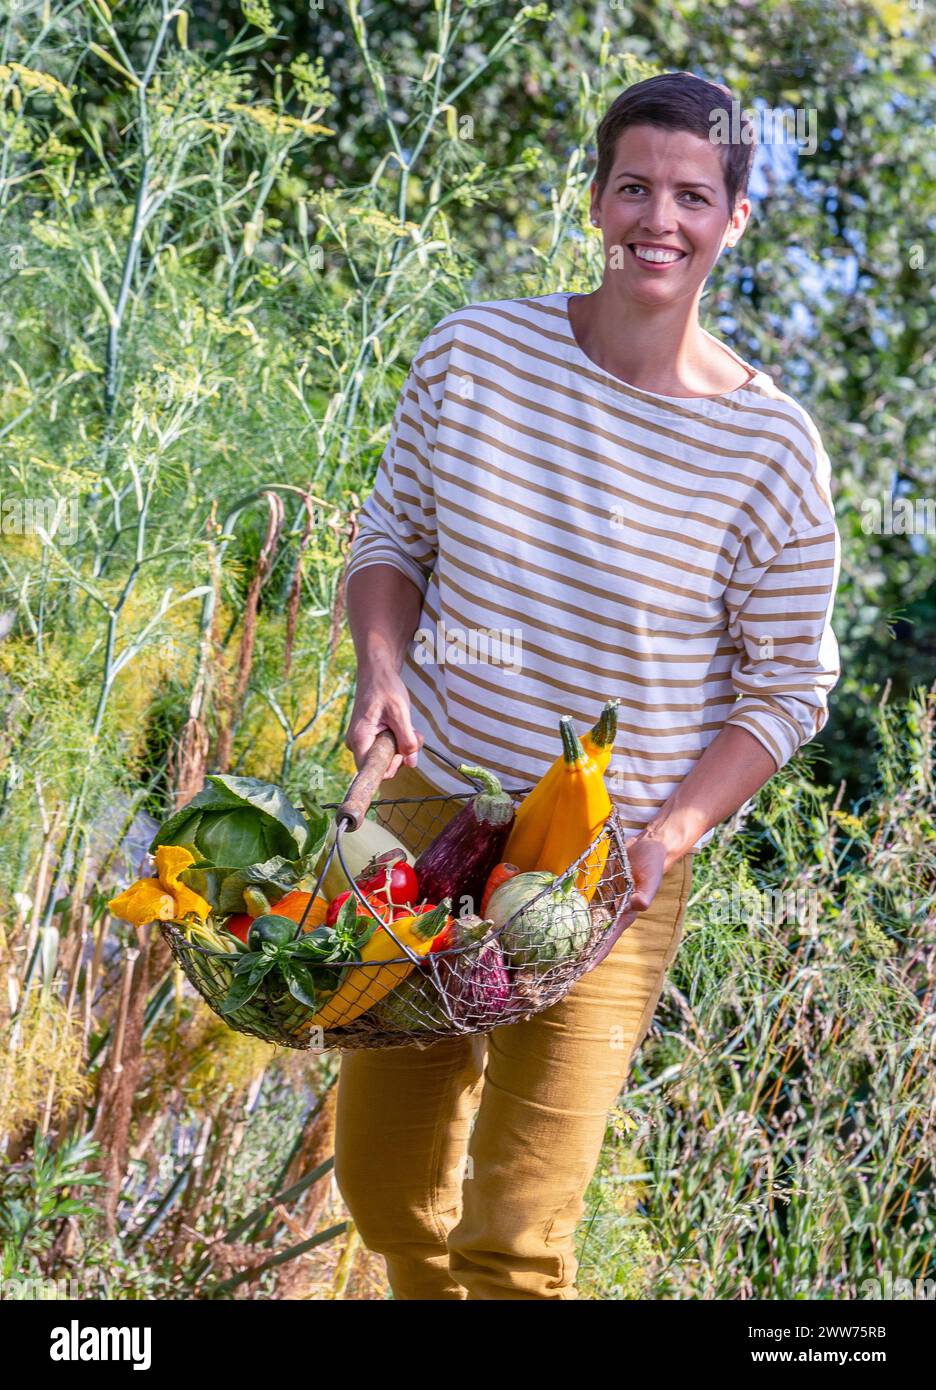 Woman in motion taking out the basket full of vegetables from the vegetable garden. Stock Photo